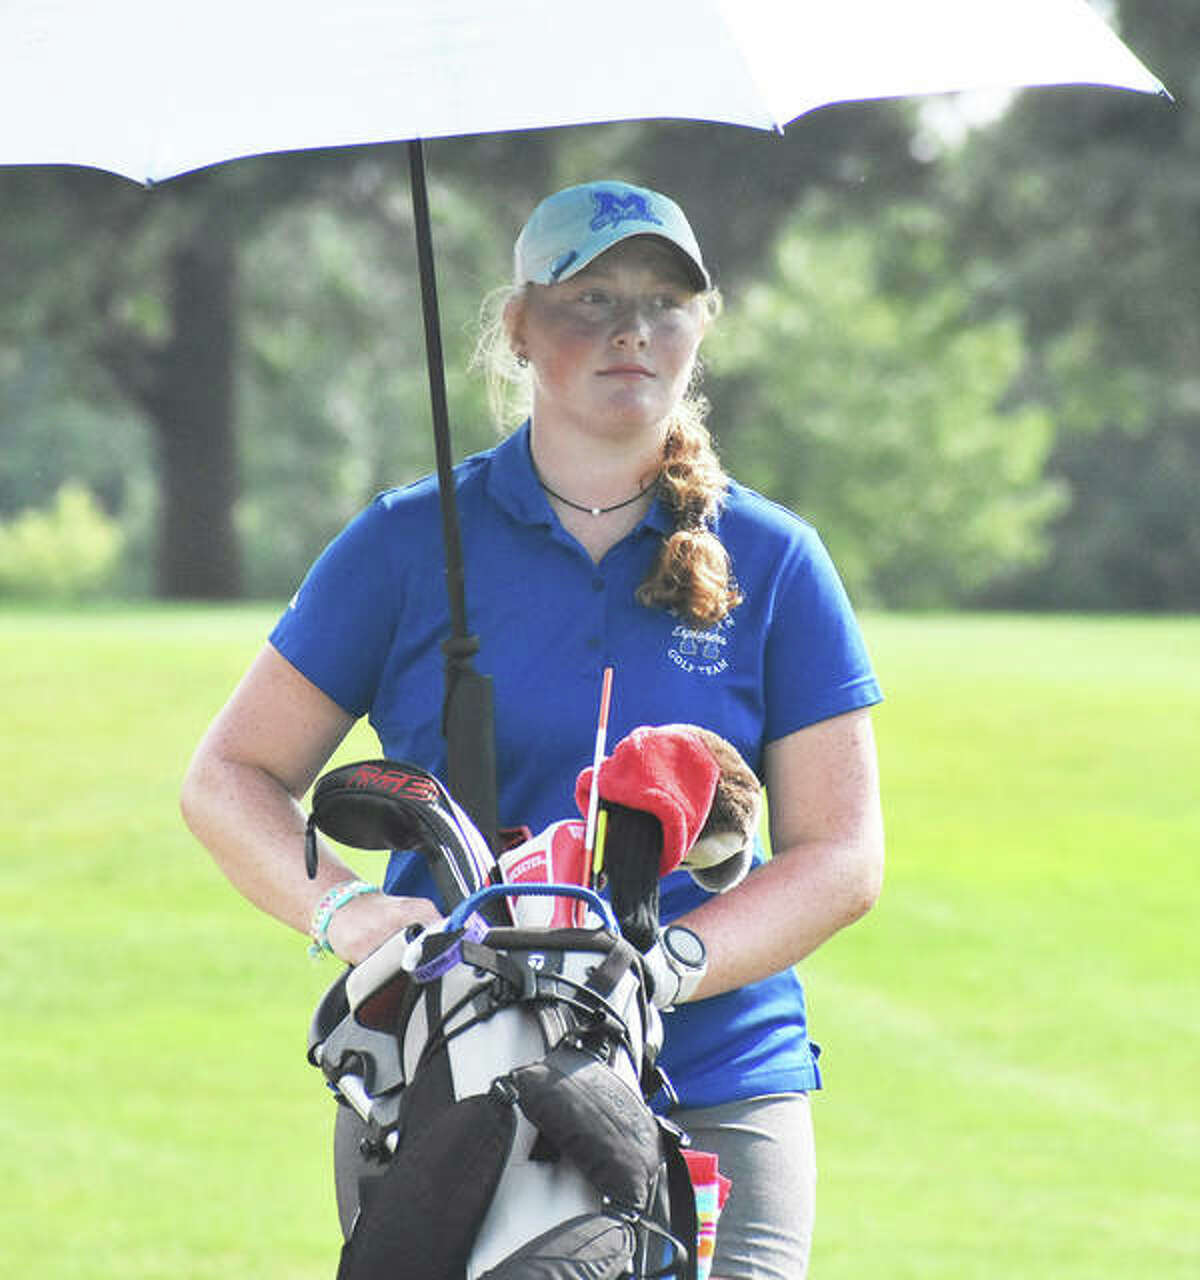 Marquette Catholic’s Gracie Piar finds some shelter from the sun under an umbrella between shots Friday at the Prep Tour Showcase at Hickory Point in Forsyth. Piar shot 75 to tie for fifth.